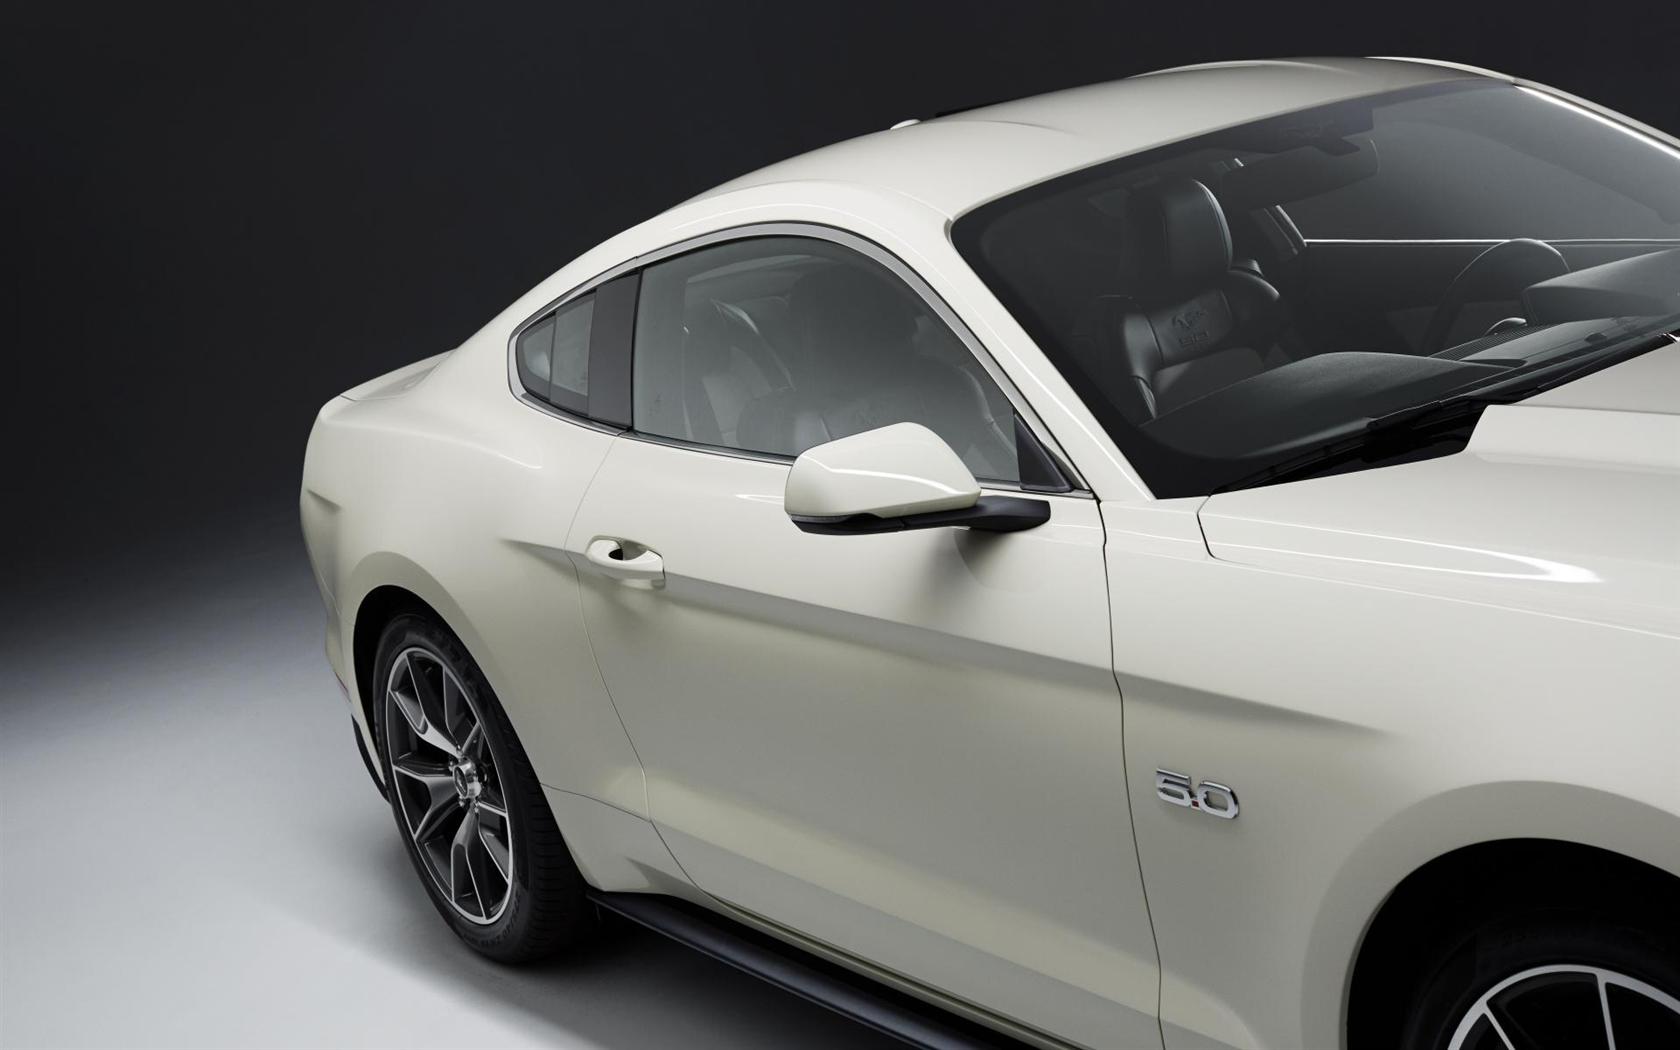 2015 Ford Mustang 50 Year Limited Edition